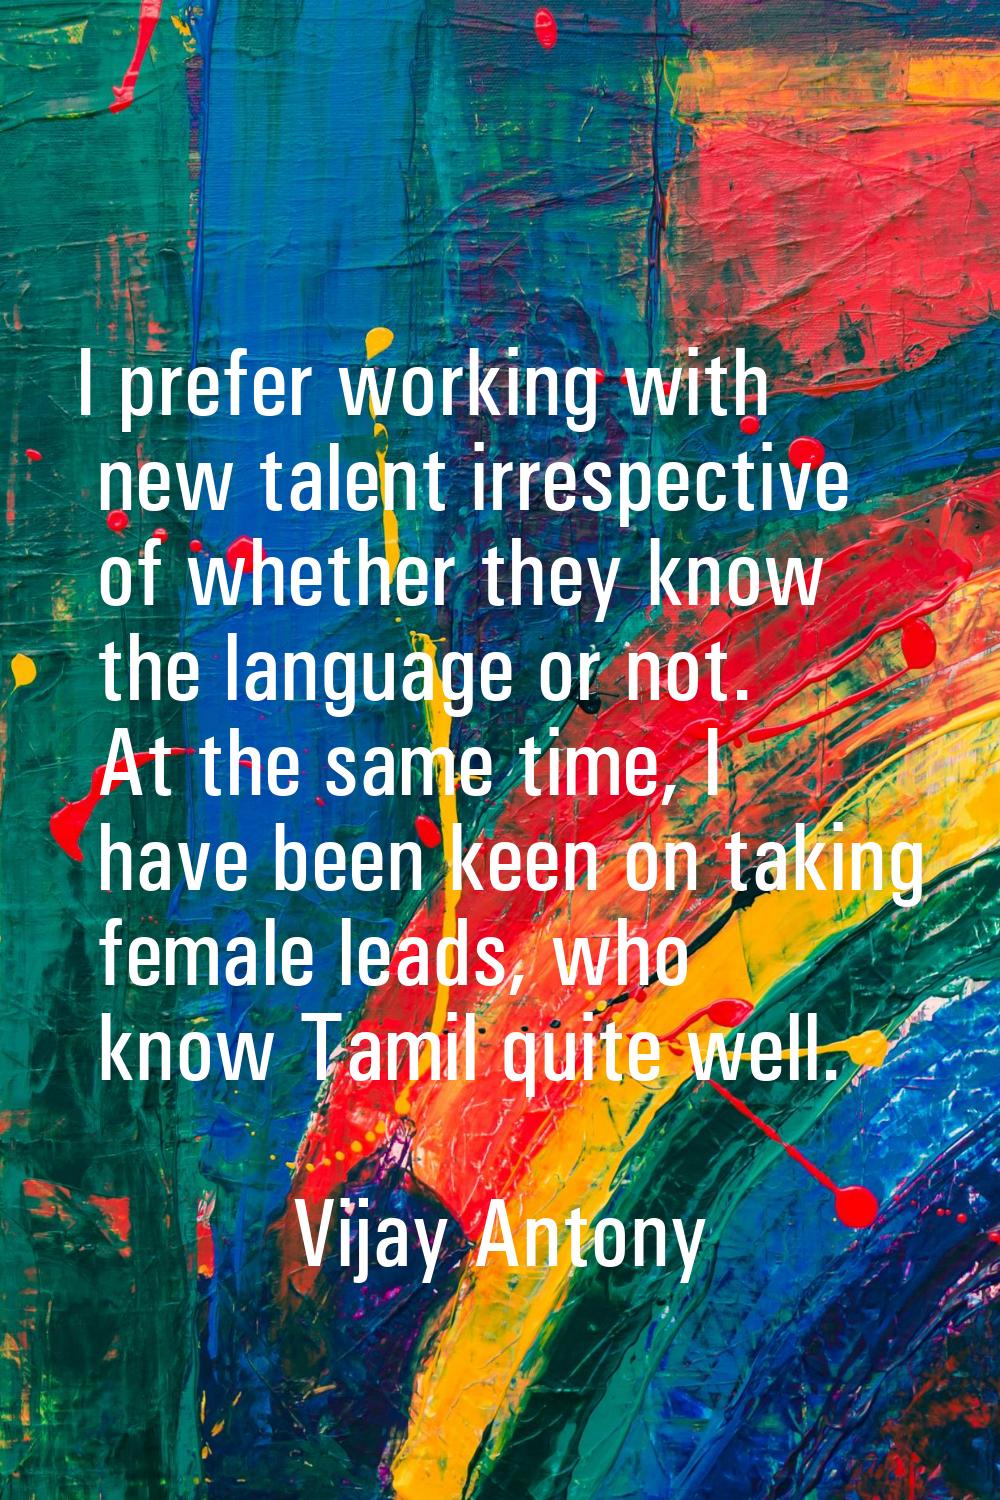 I prefer working with new talent irrespective of whether they know the language or not. At the same